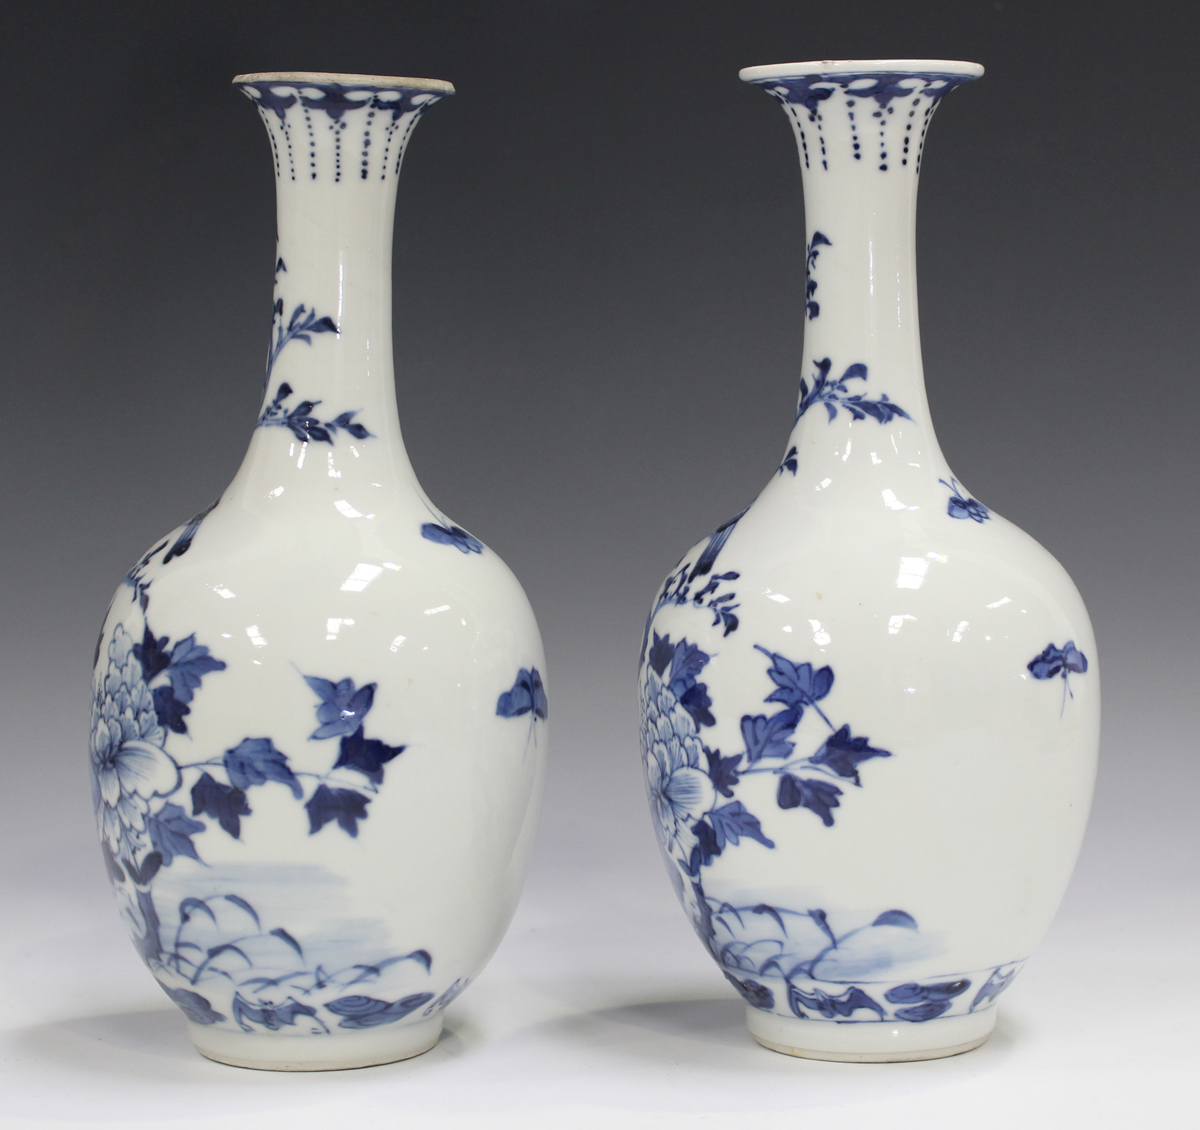 A pair of Chinese blue and white porcelain bottle vases, late 19th century, each ovoid body and - Image 13 of 13